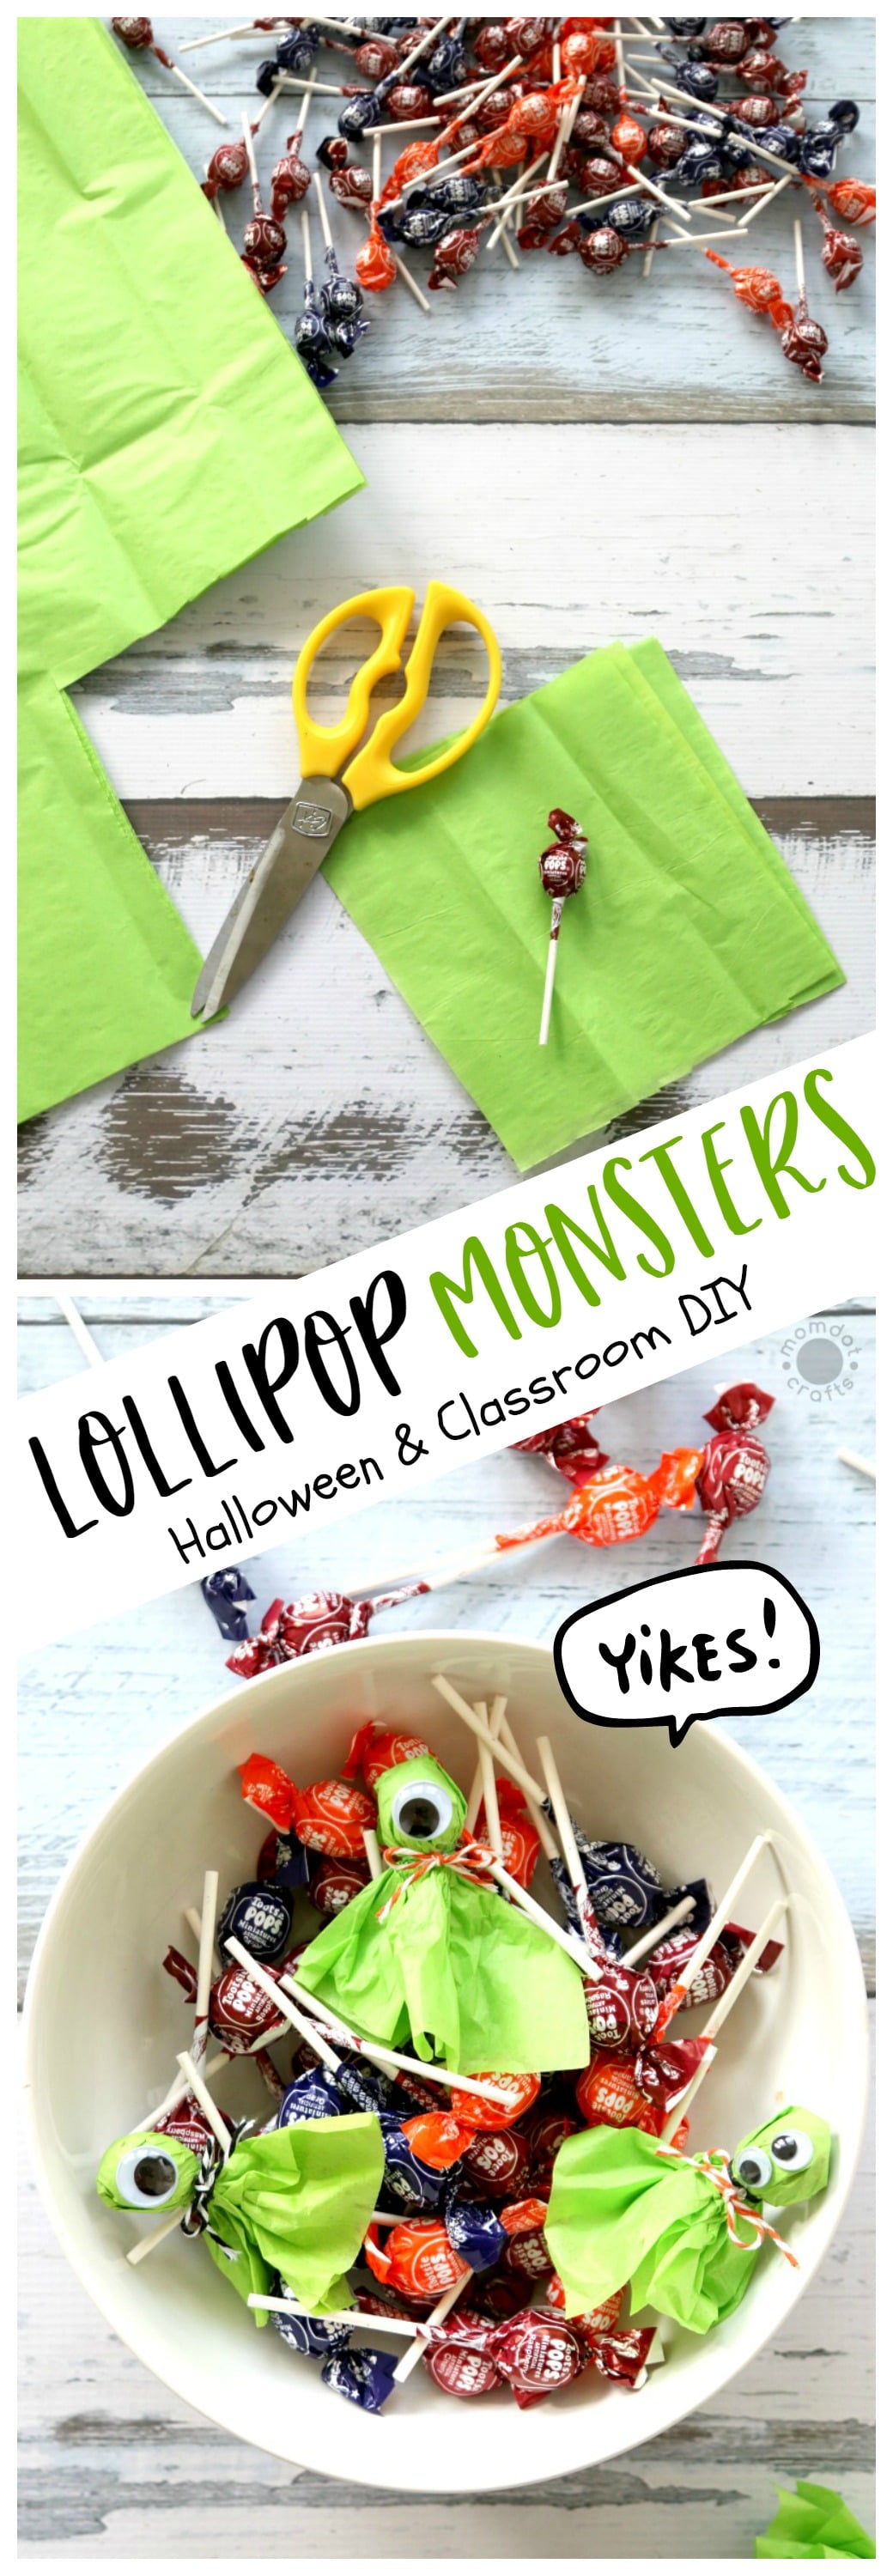 Lollipop (lolly pop) Monsters are just as cute as Ghosts and so fun to make! Just pop a variety of googly eyes for this super fun pass out for Halloween or Classroom parties